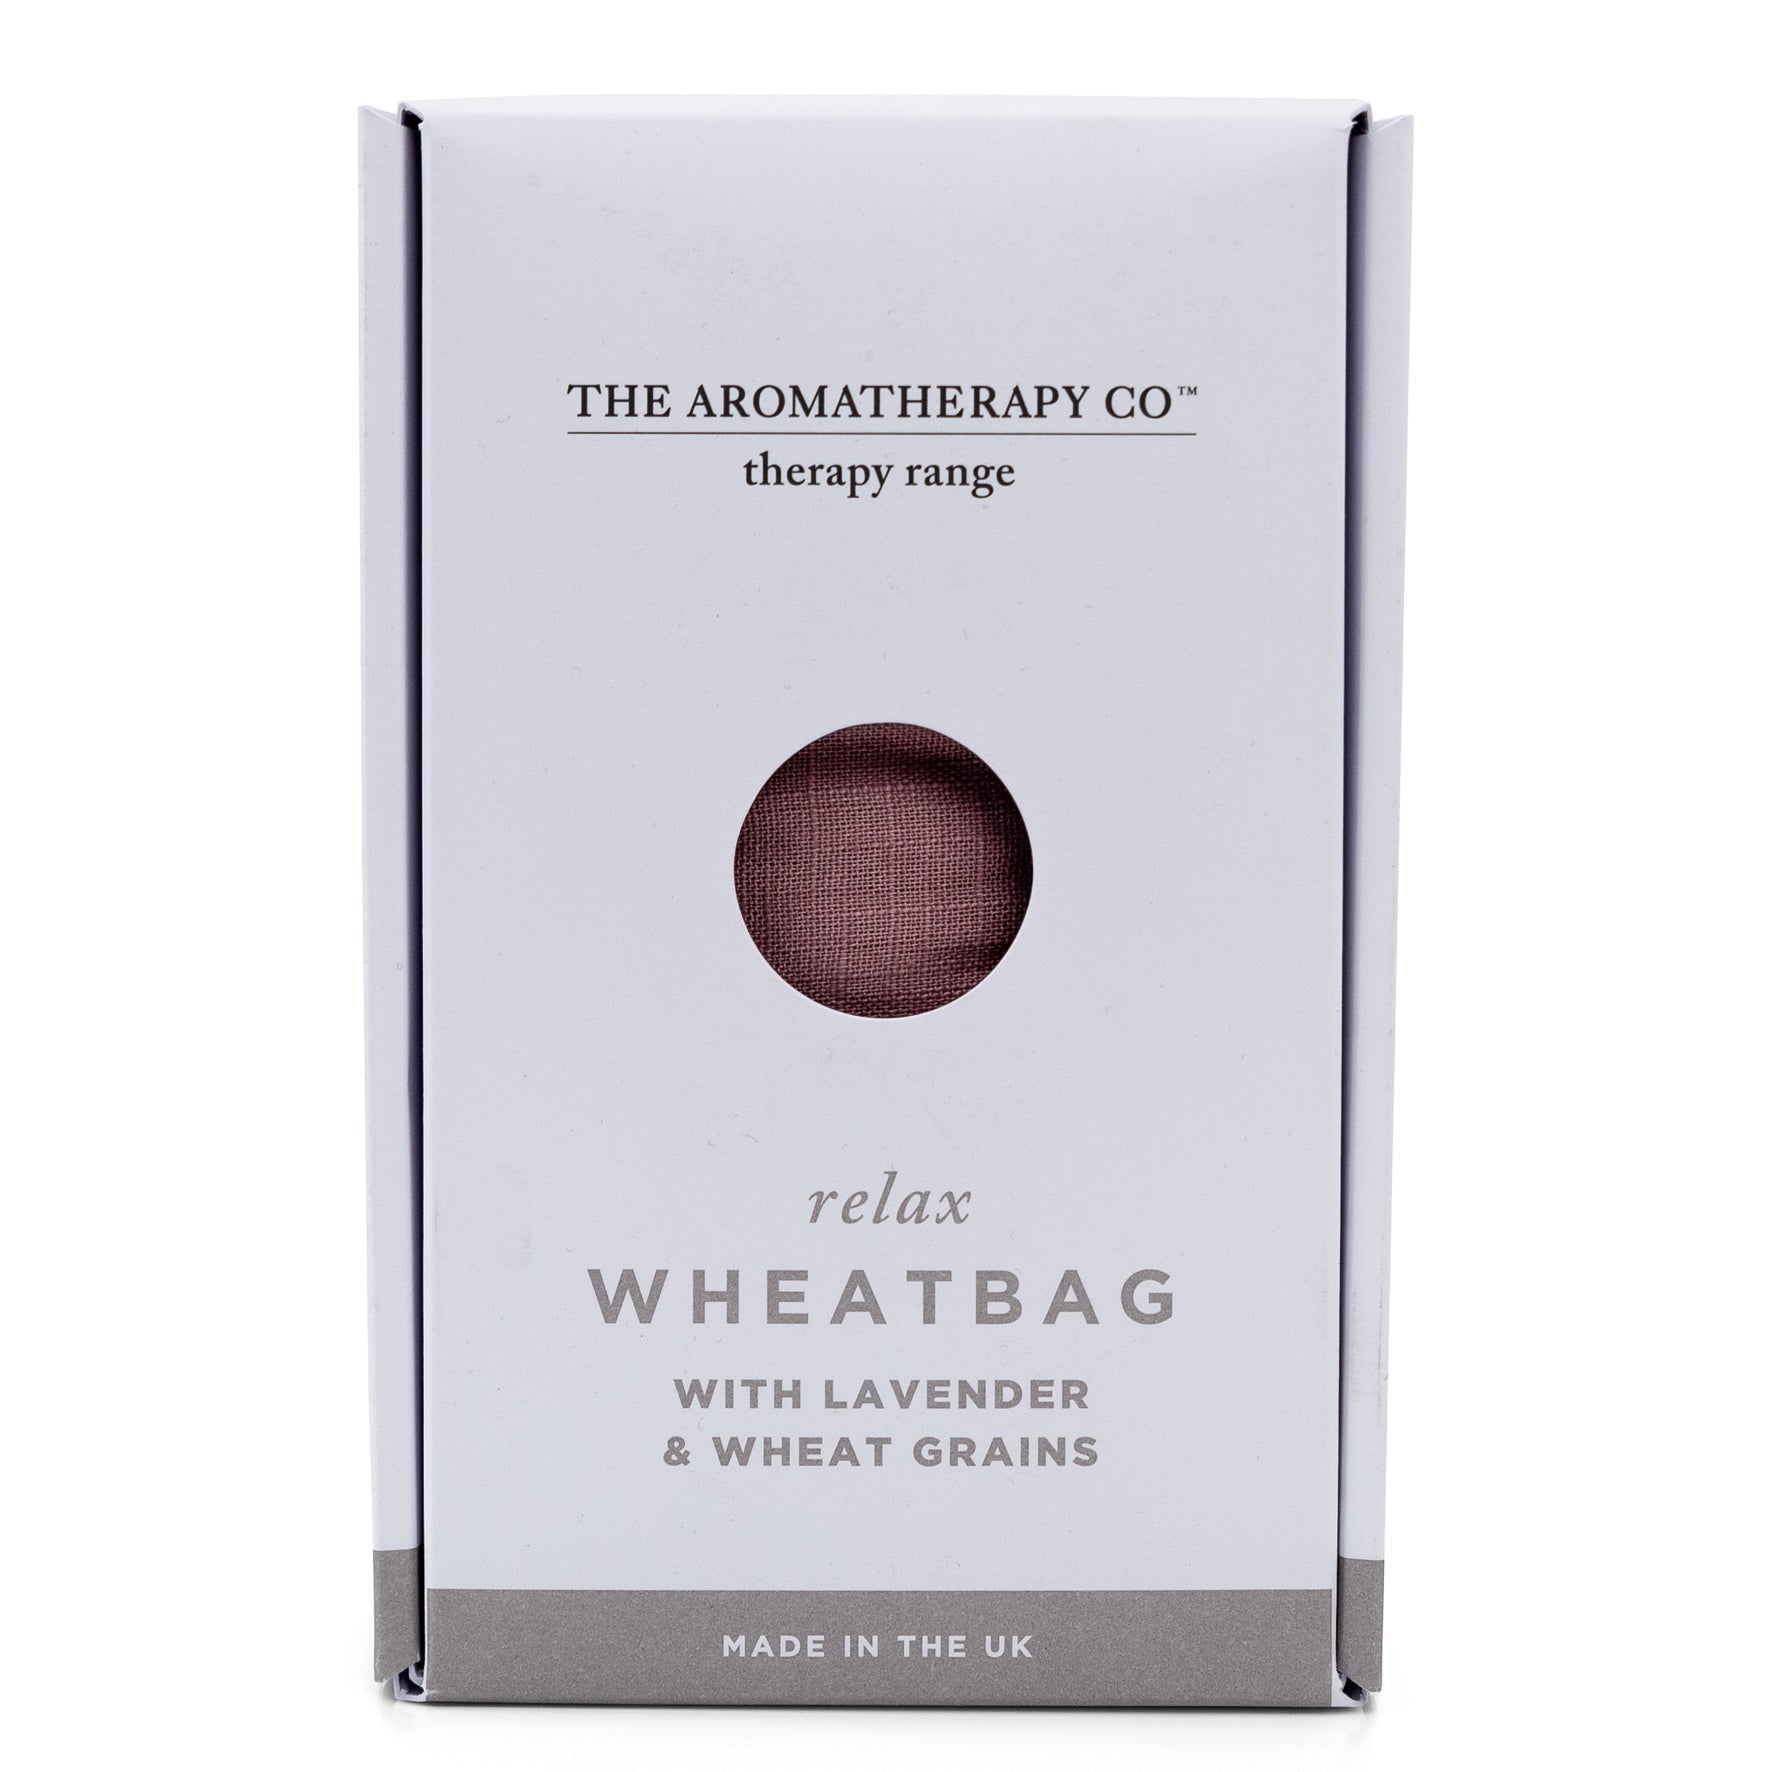 The Aromatherapy Co Soothing Wheat Bag With Lavender and Wheat Grains